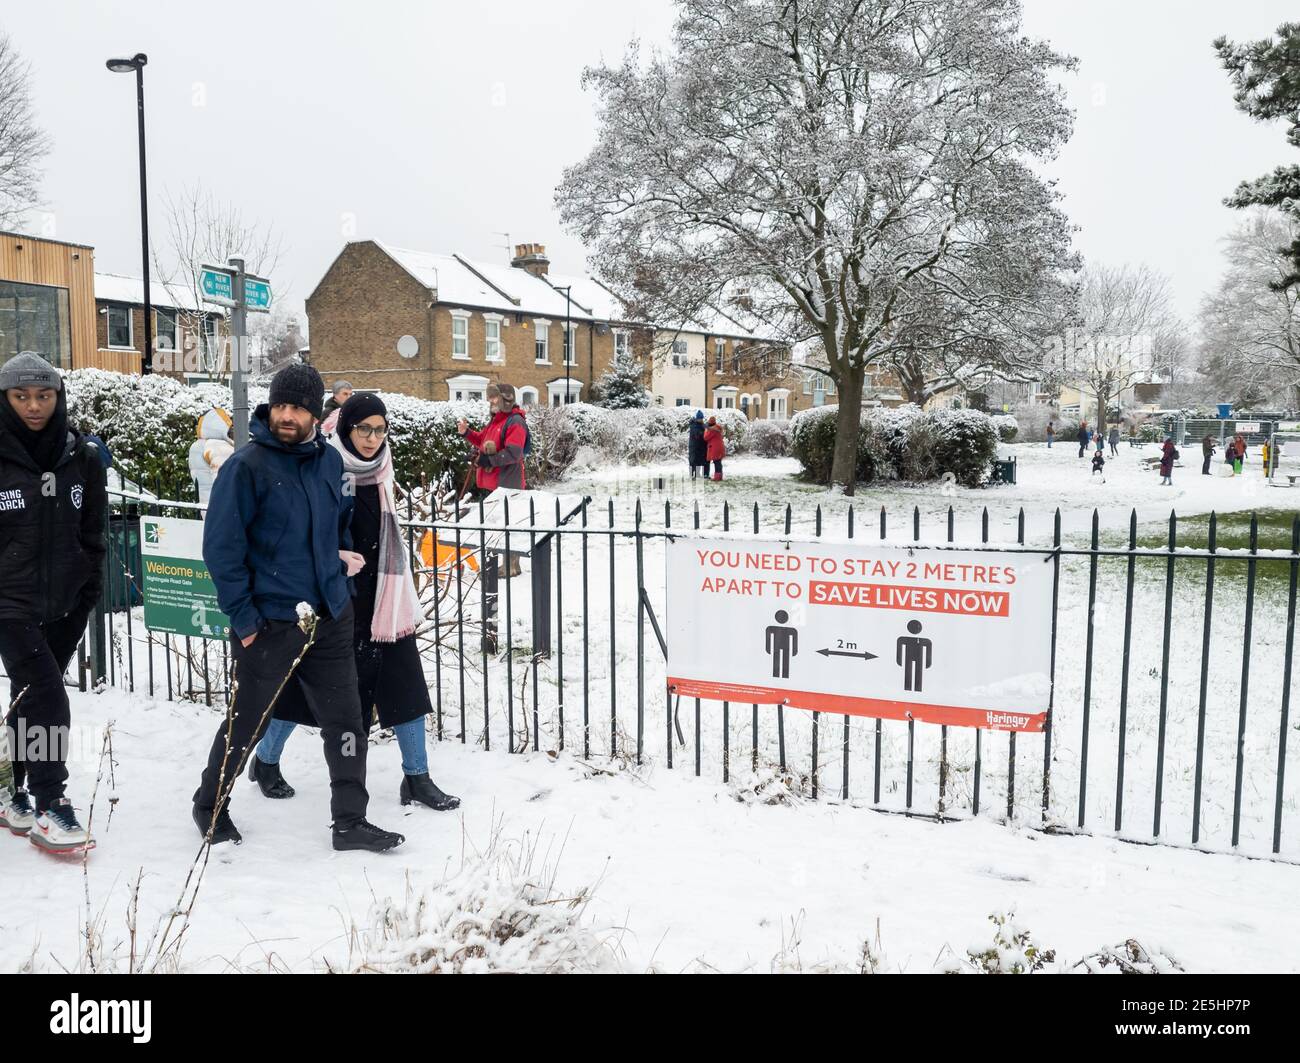 A rare snowfall in London enticed people out to exercise despite Covid-19 lockdown. Stock Photo